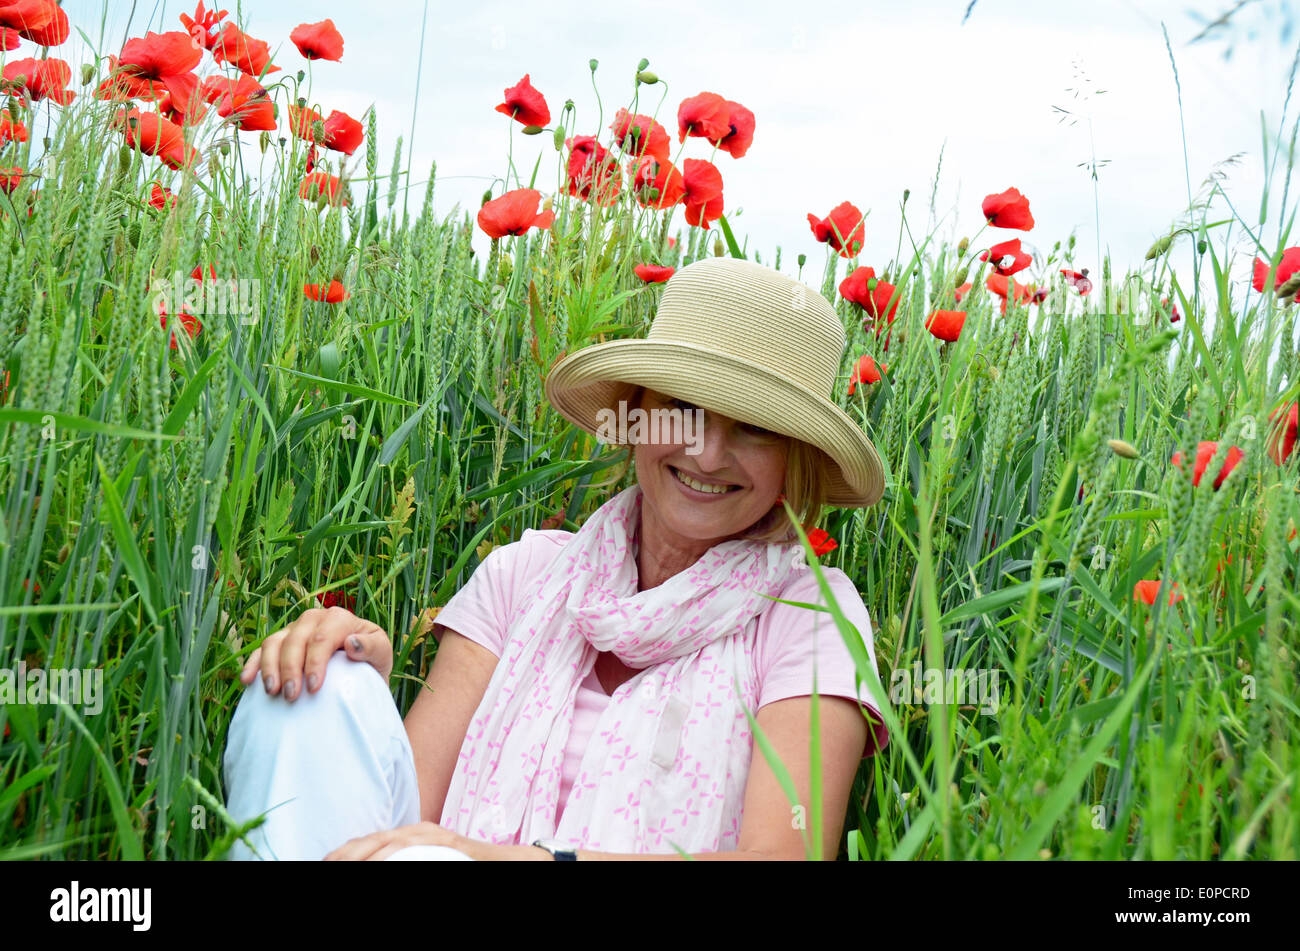 Woman with hat sitting on meadow Banque D'Images